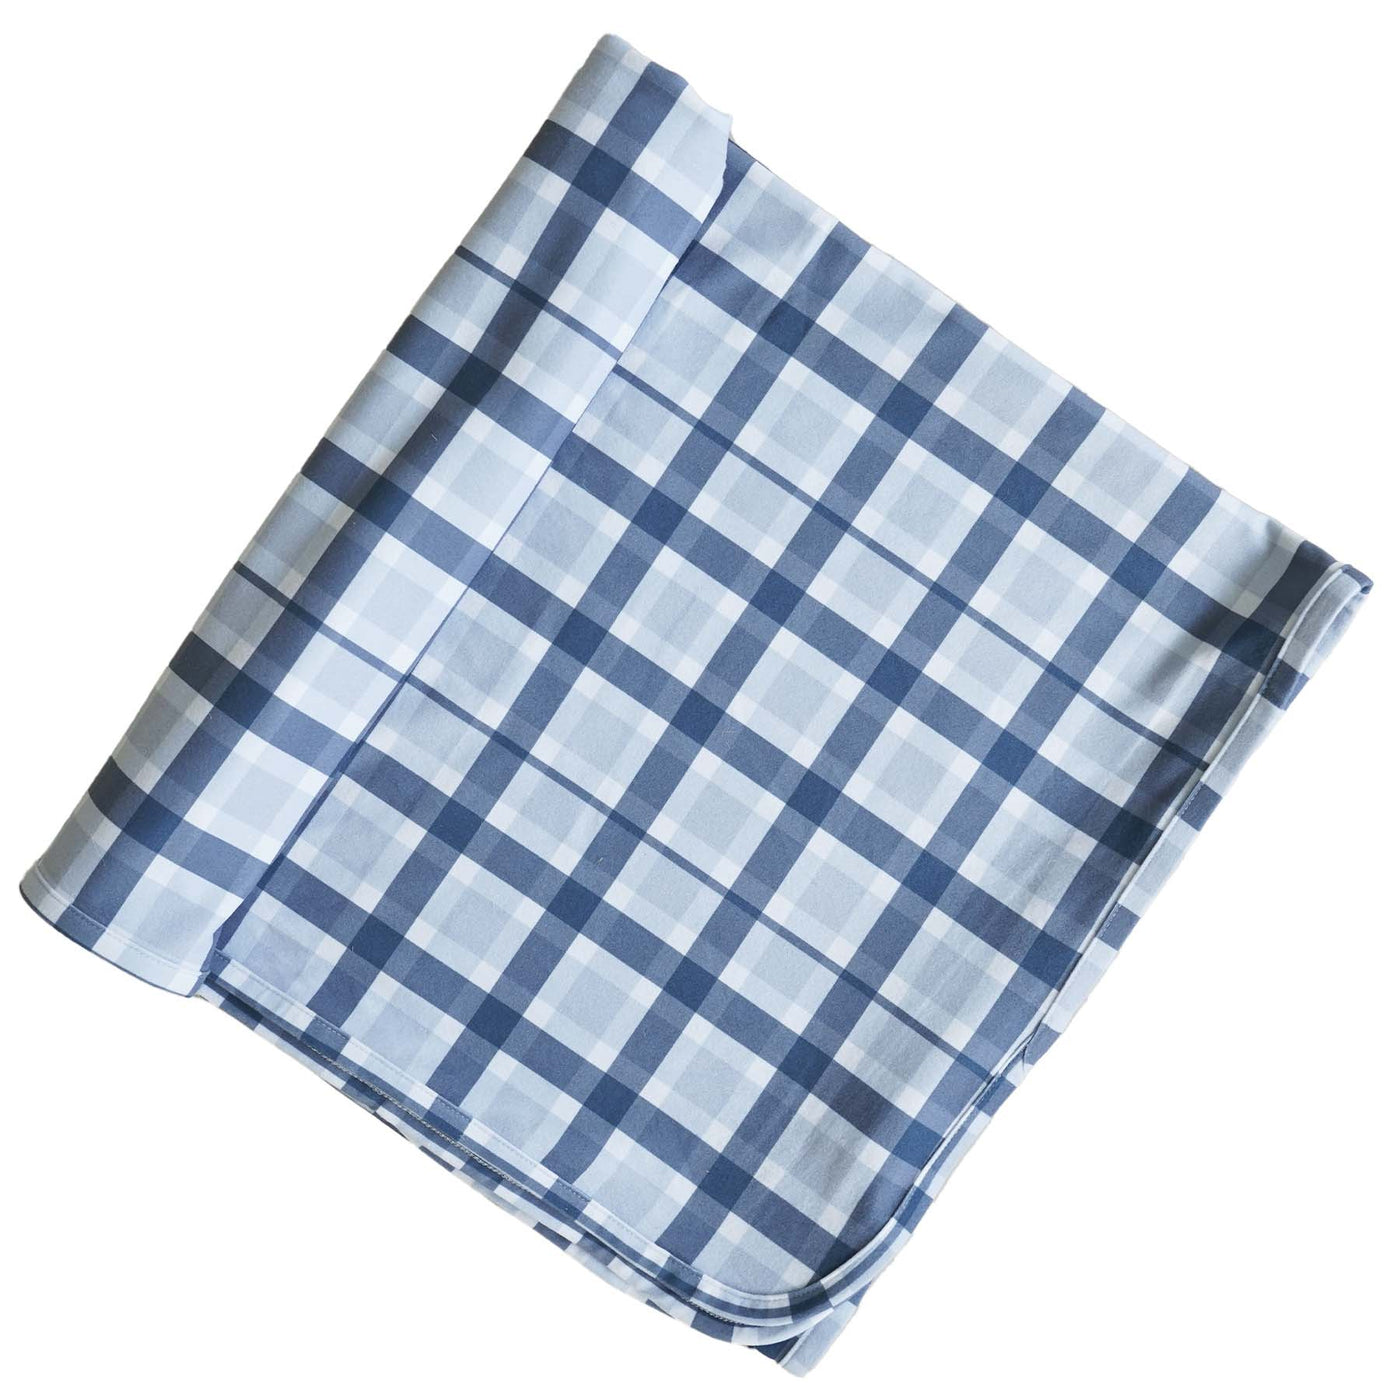 Paxton's Plaid Oversized Swaddle Blanket